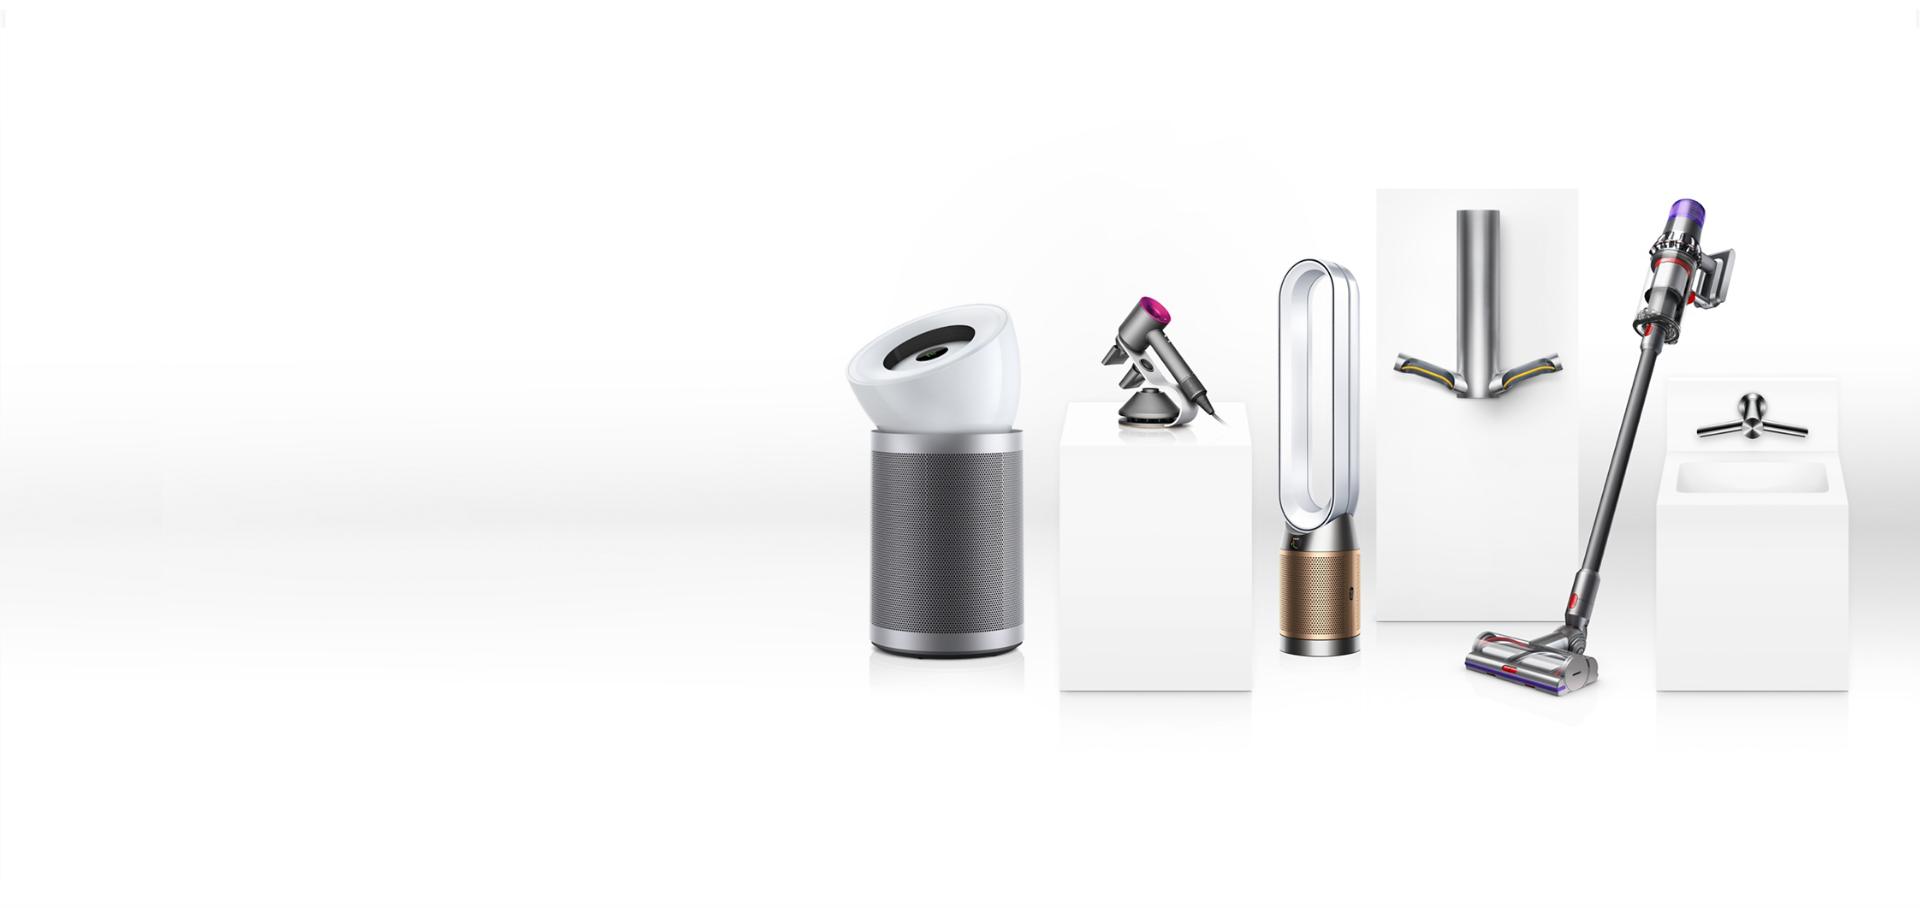 The range of Dyson business machines.